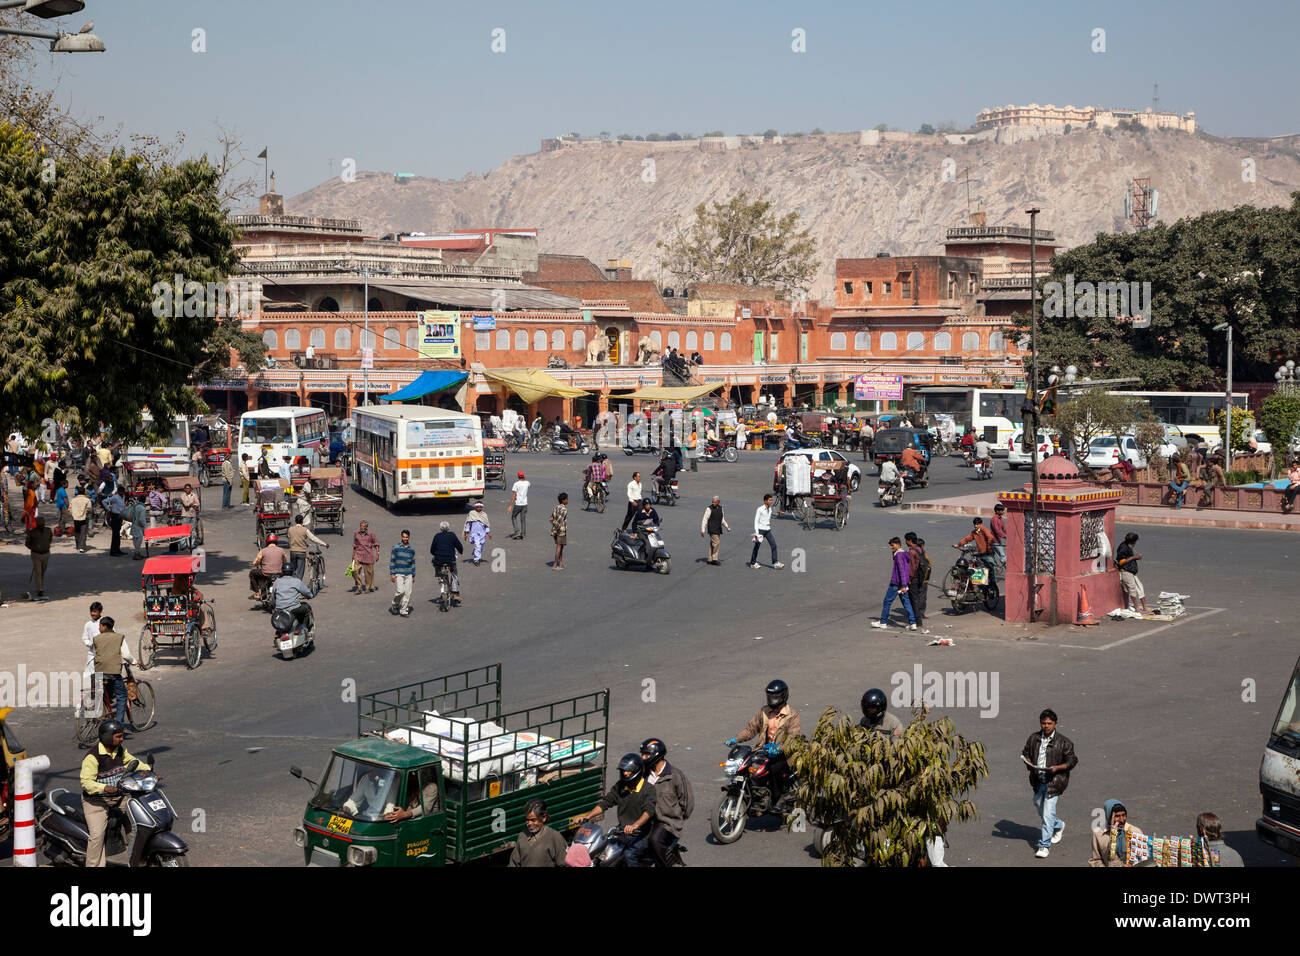 Jaipur, Rajasthan, India. Mid-day Traffic in Central Jaipur. Nahargarh Fort on Hilltop in the Distrance. Stock Photo